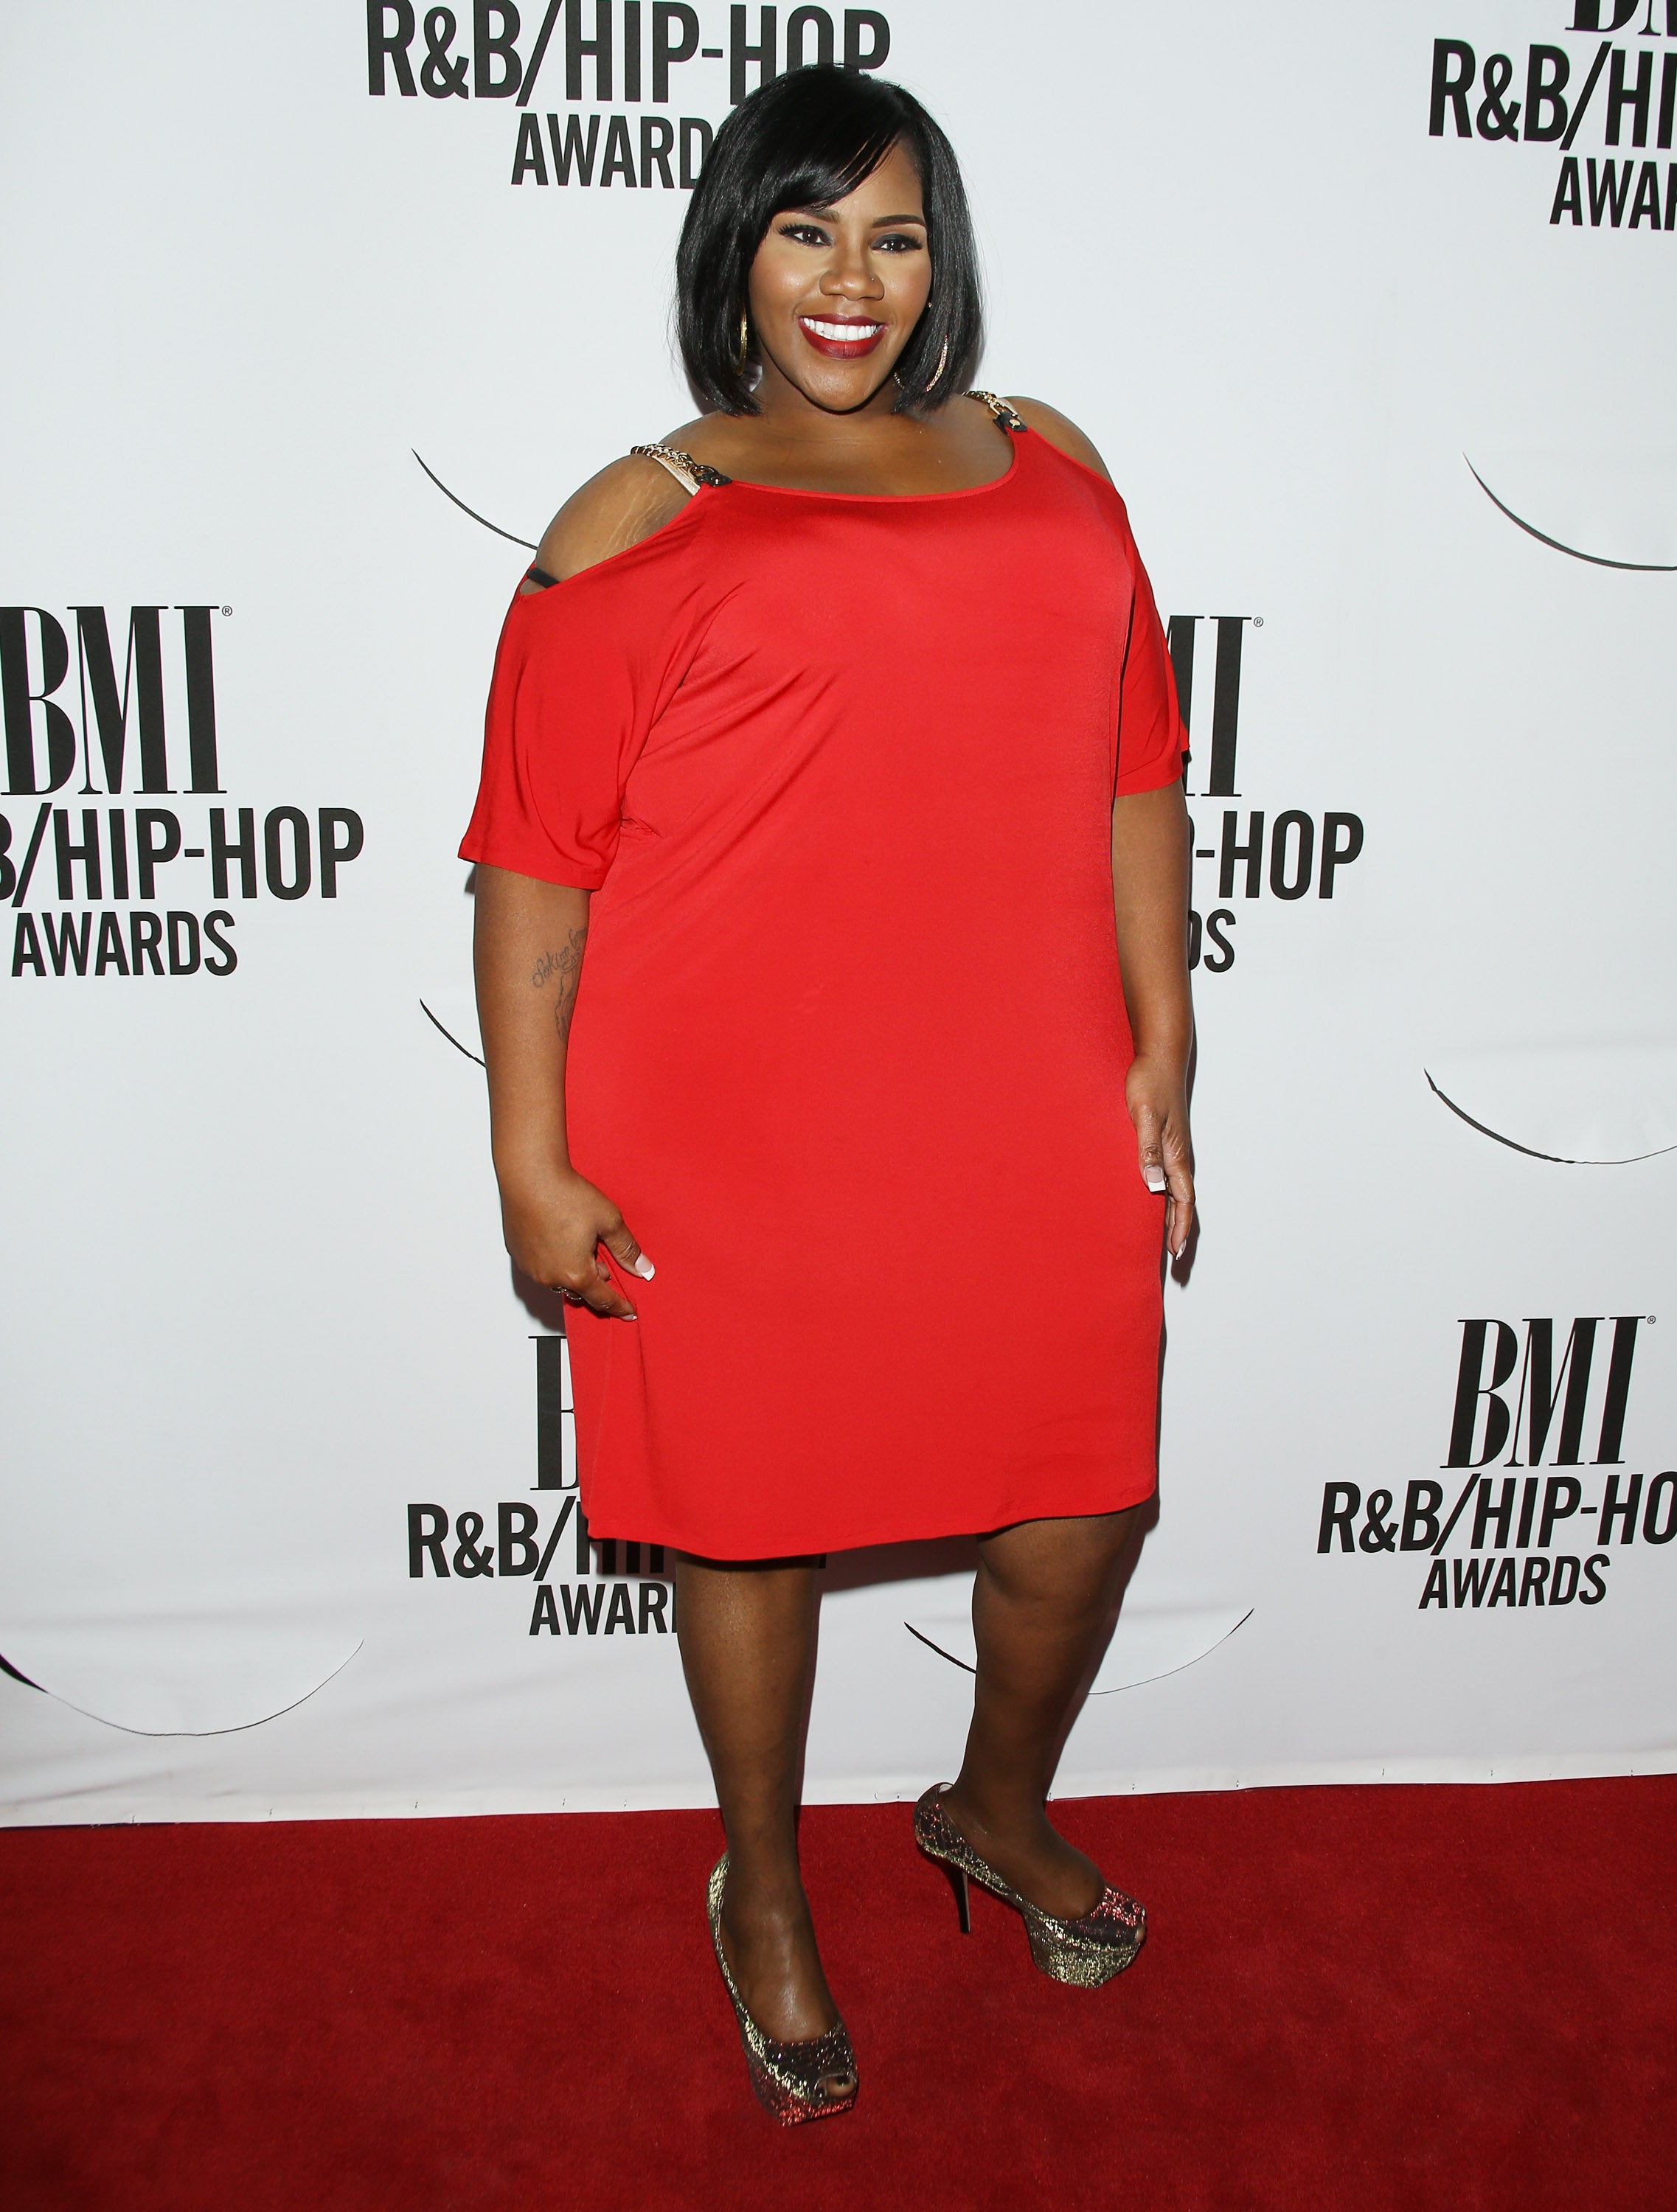 Nene Leakes, Michael Ealy, Kelly Price and More!
